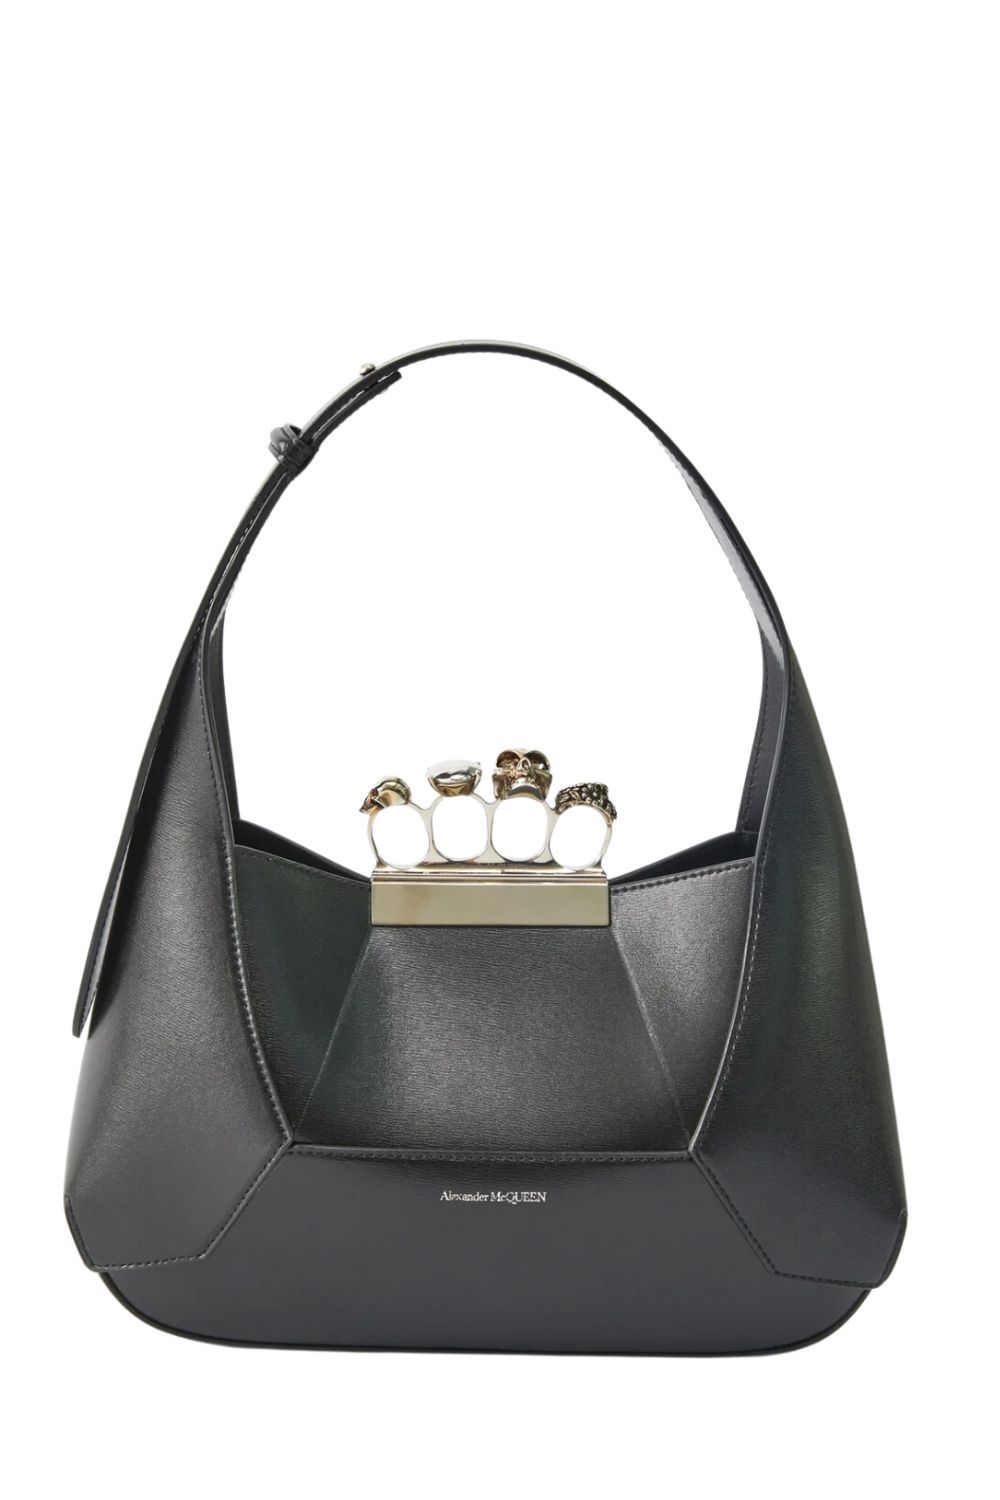 Why Alexander McQueen's jewelled hobo bag is a must have | Marie Claire UK